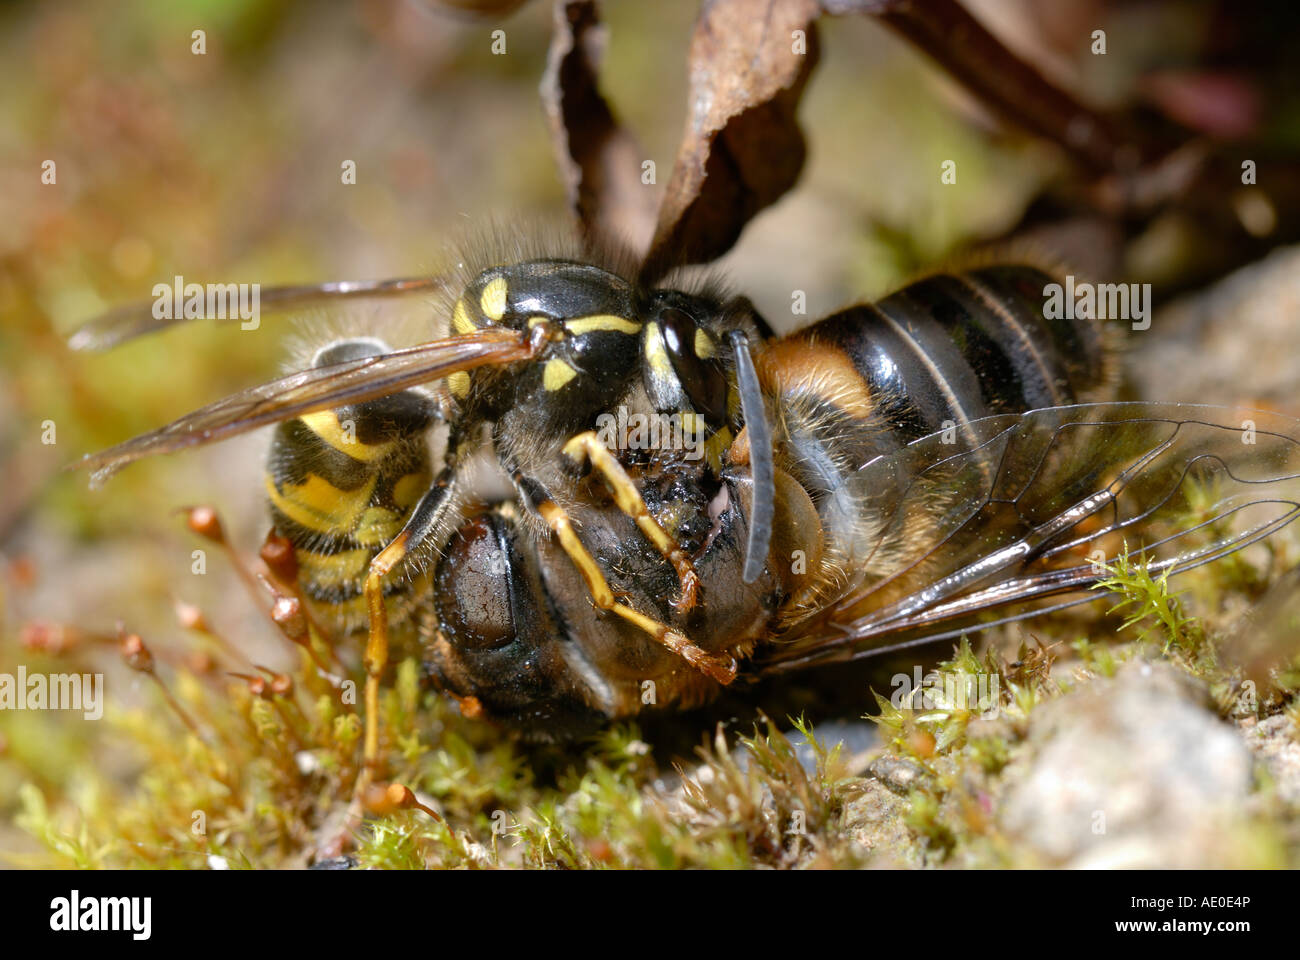 Common Wasp, Vesputa vulgaris removing wing muscles from Drone Fly,  Eristalis tenax as food for it's young, Wales, UK Stock Photo - Alamy